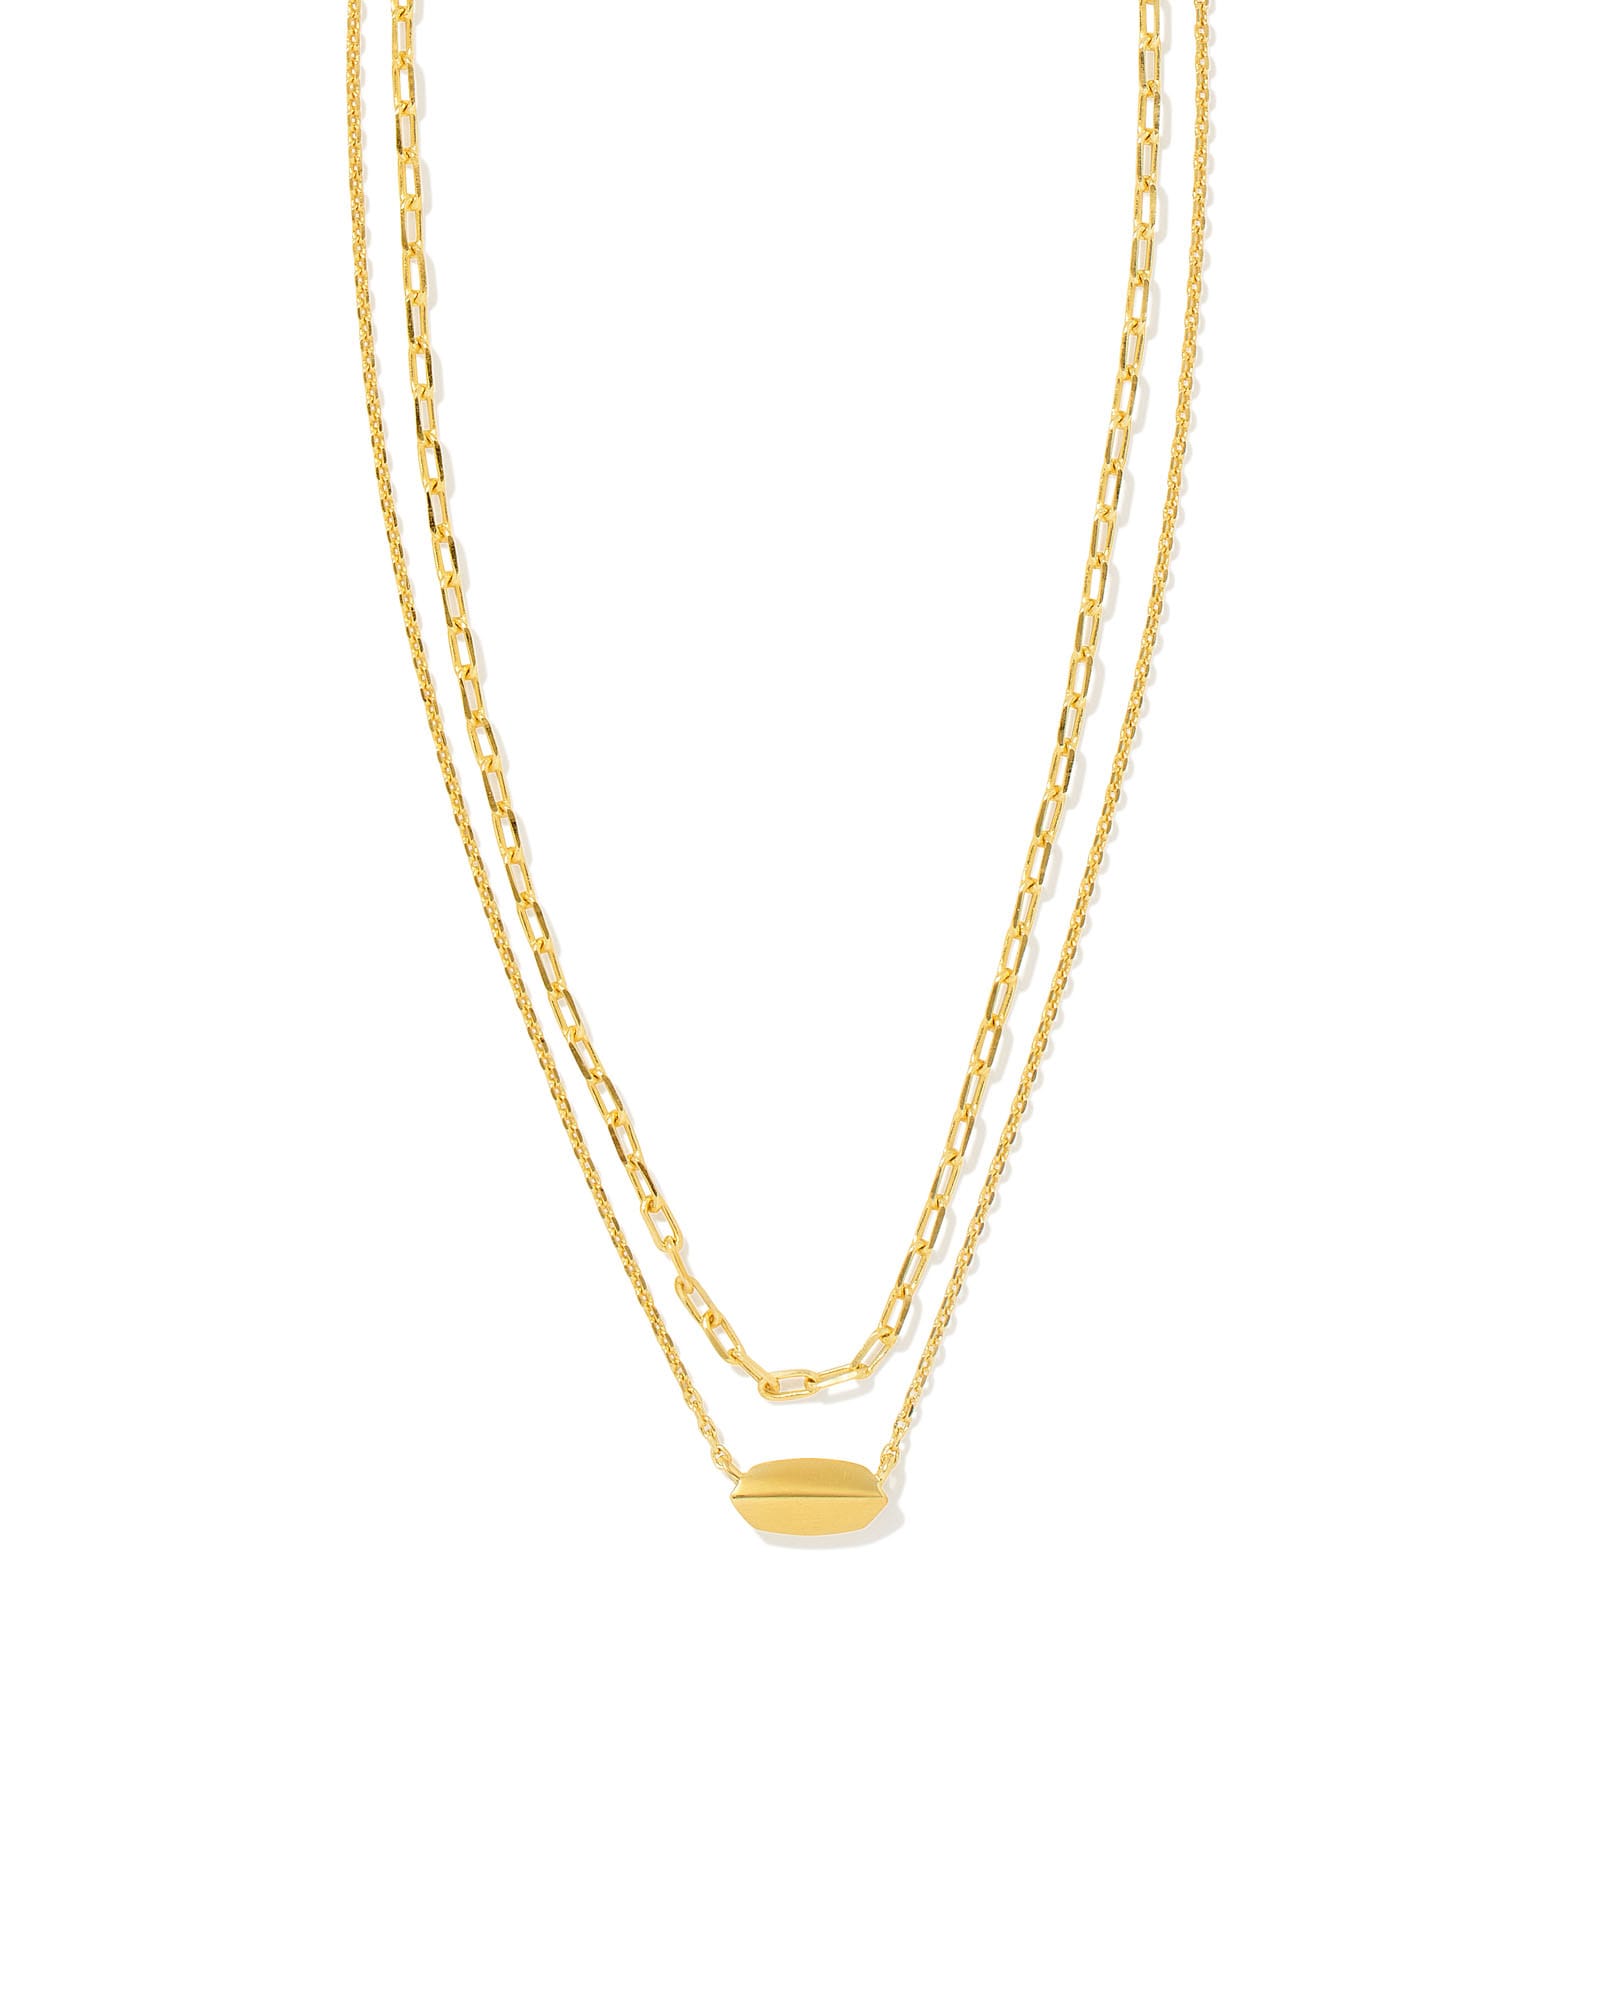 Brooke Multi Strand Necklace in Gold